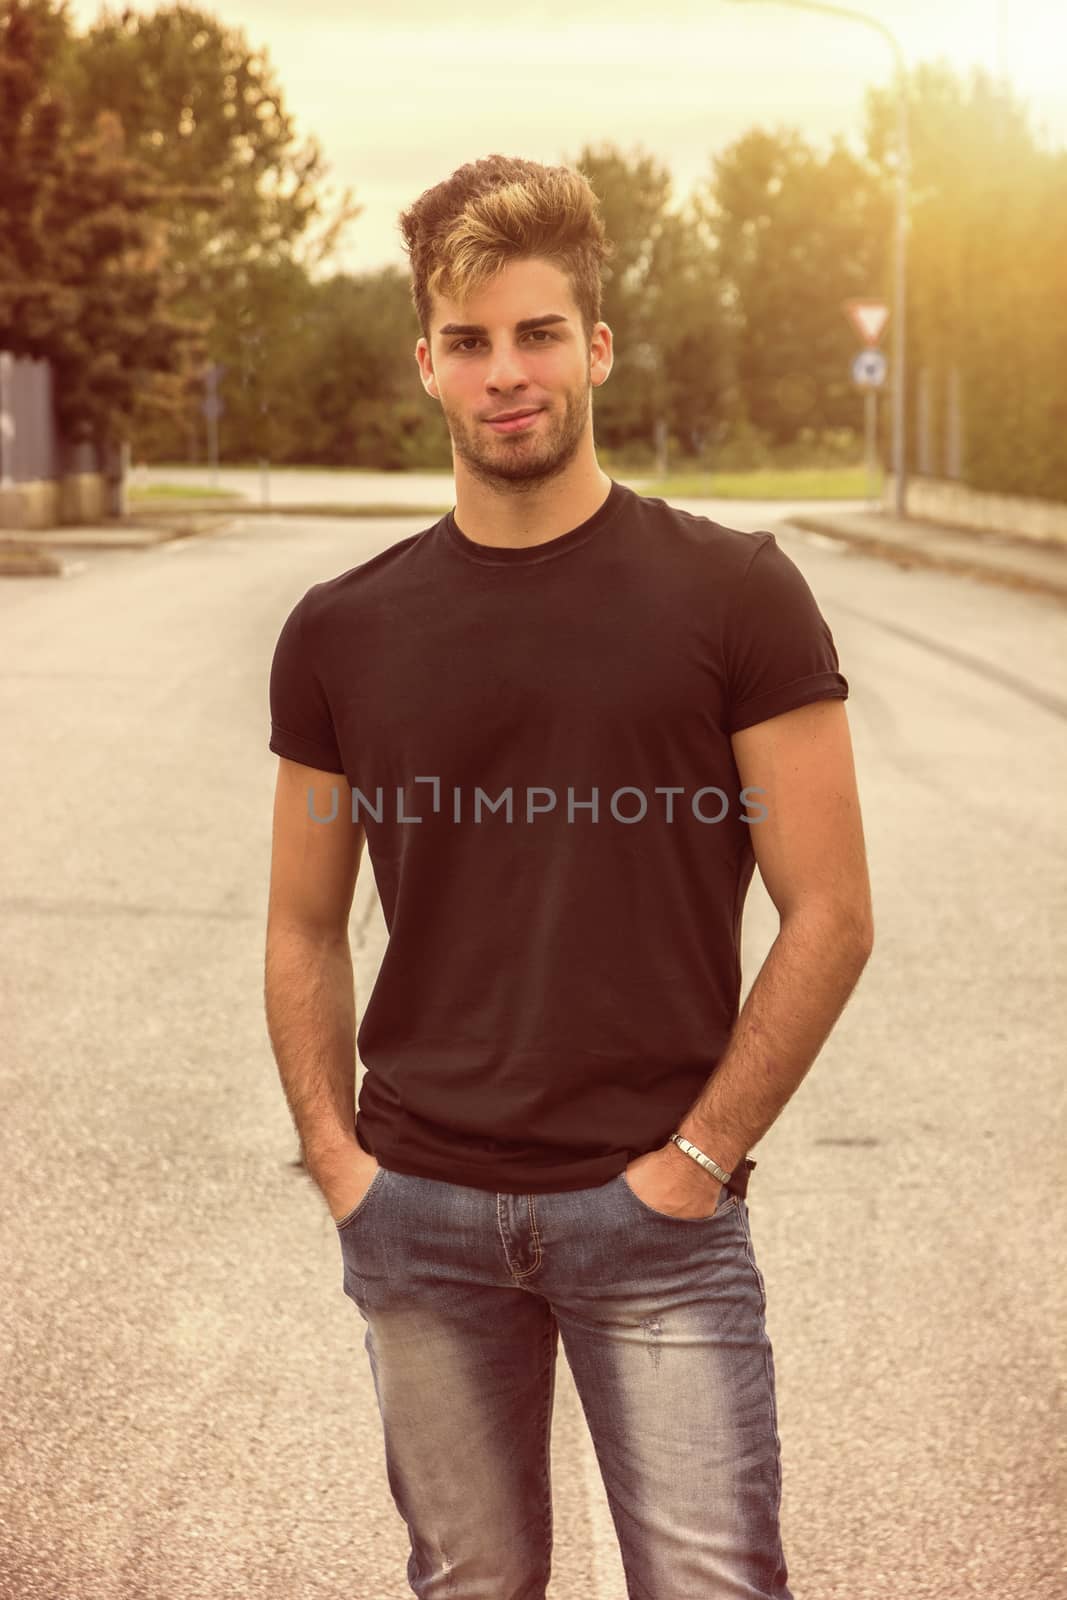 Attractive smiling man standing in the middle of city street looking at camera